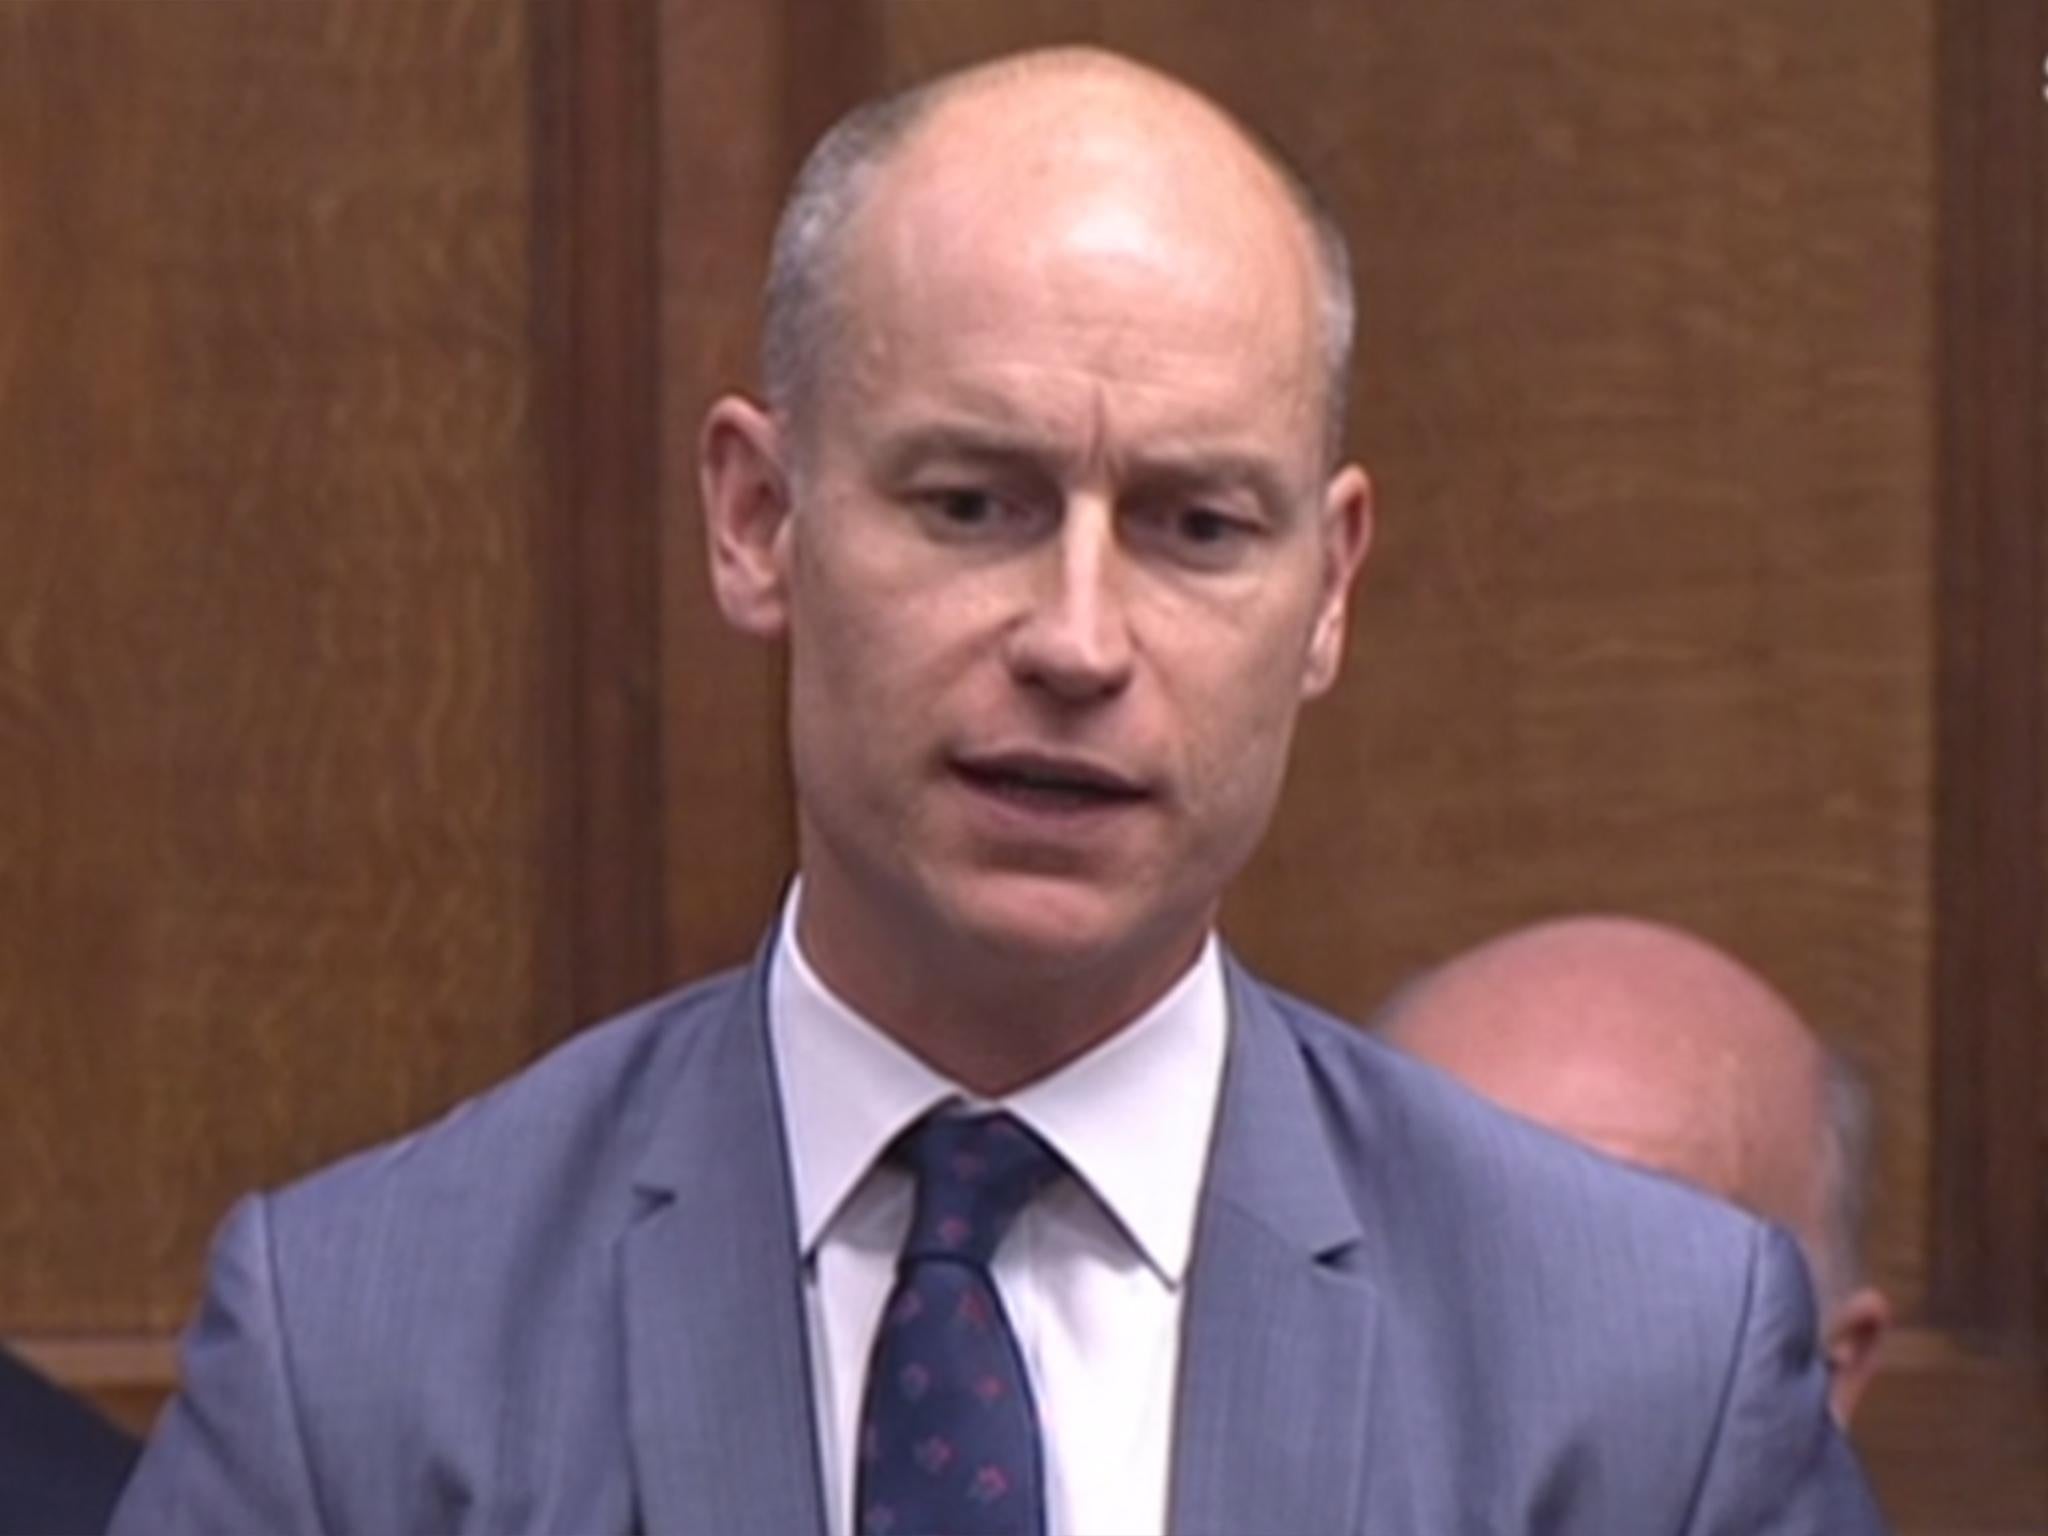 Stephen Kinnock said May’s renegotiated?agreement constituted the foundations of a deal